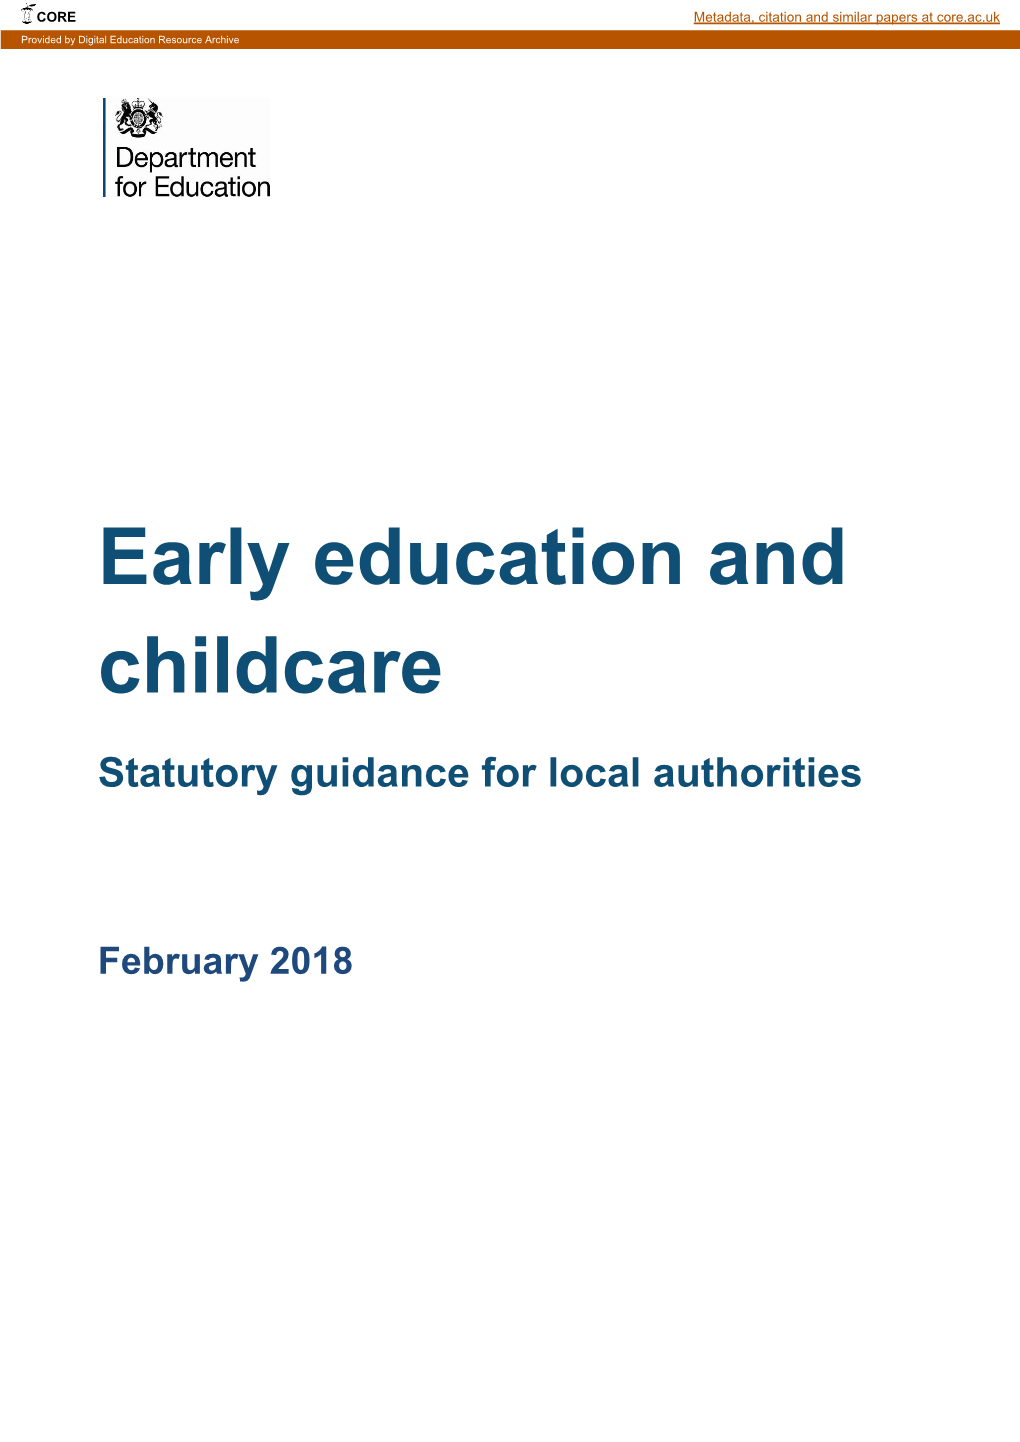 Early Education and Childcare: Statutory Guidance for Local